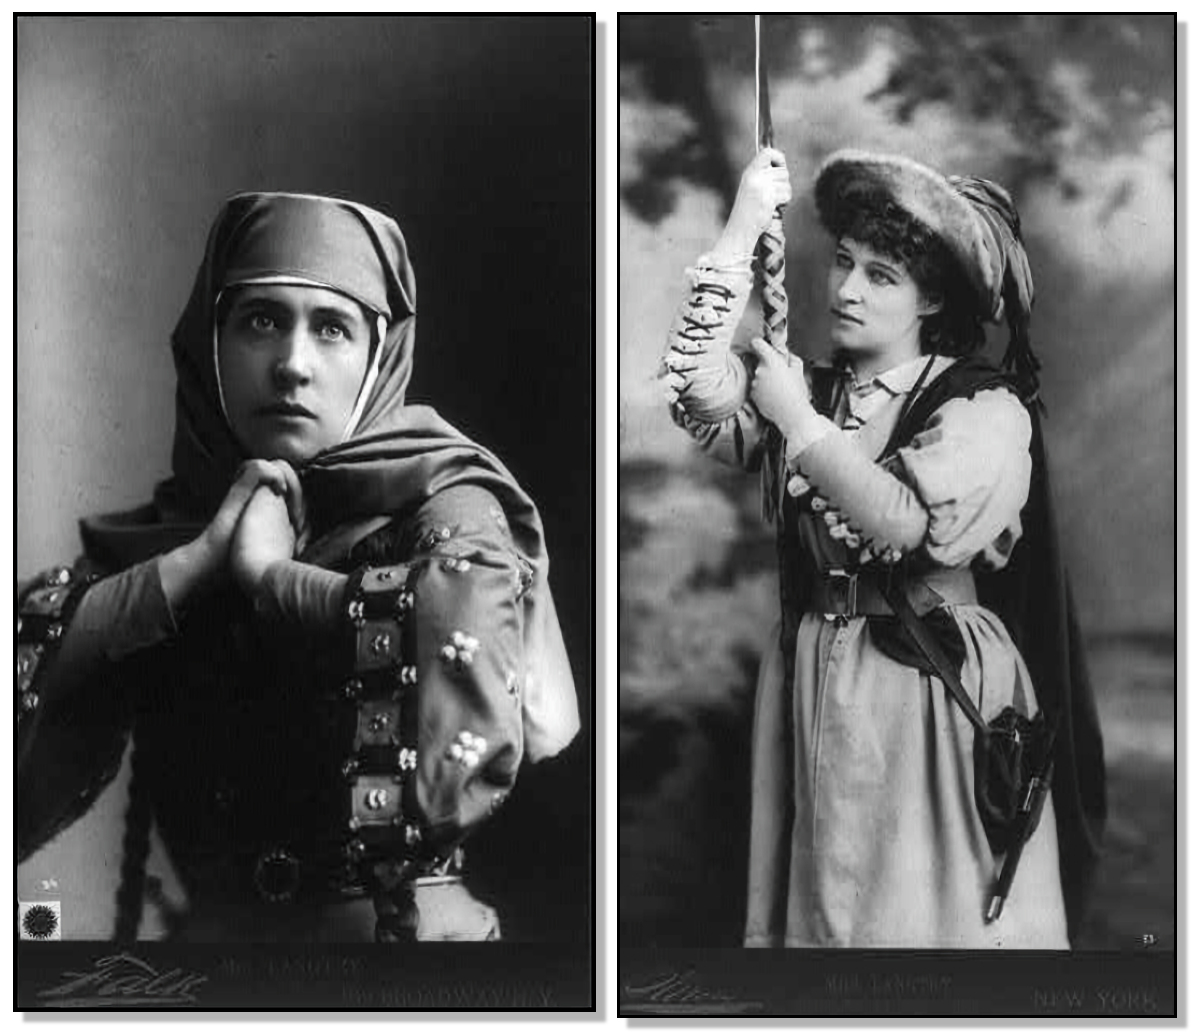 Left: Photograph of Lillie Langtry as Lady Macbeth c1899.  Photo copyrighted by B.J. Falk, New York, N.Y. Library of Congress, Public Domain. Right: Photograph of Lillie Langtry in costume and holding spear, c1882. Photo copyrighted by Napoleon Sarony.  Library of Congress, Public Domain.